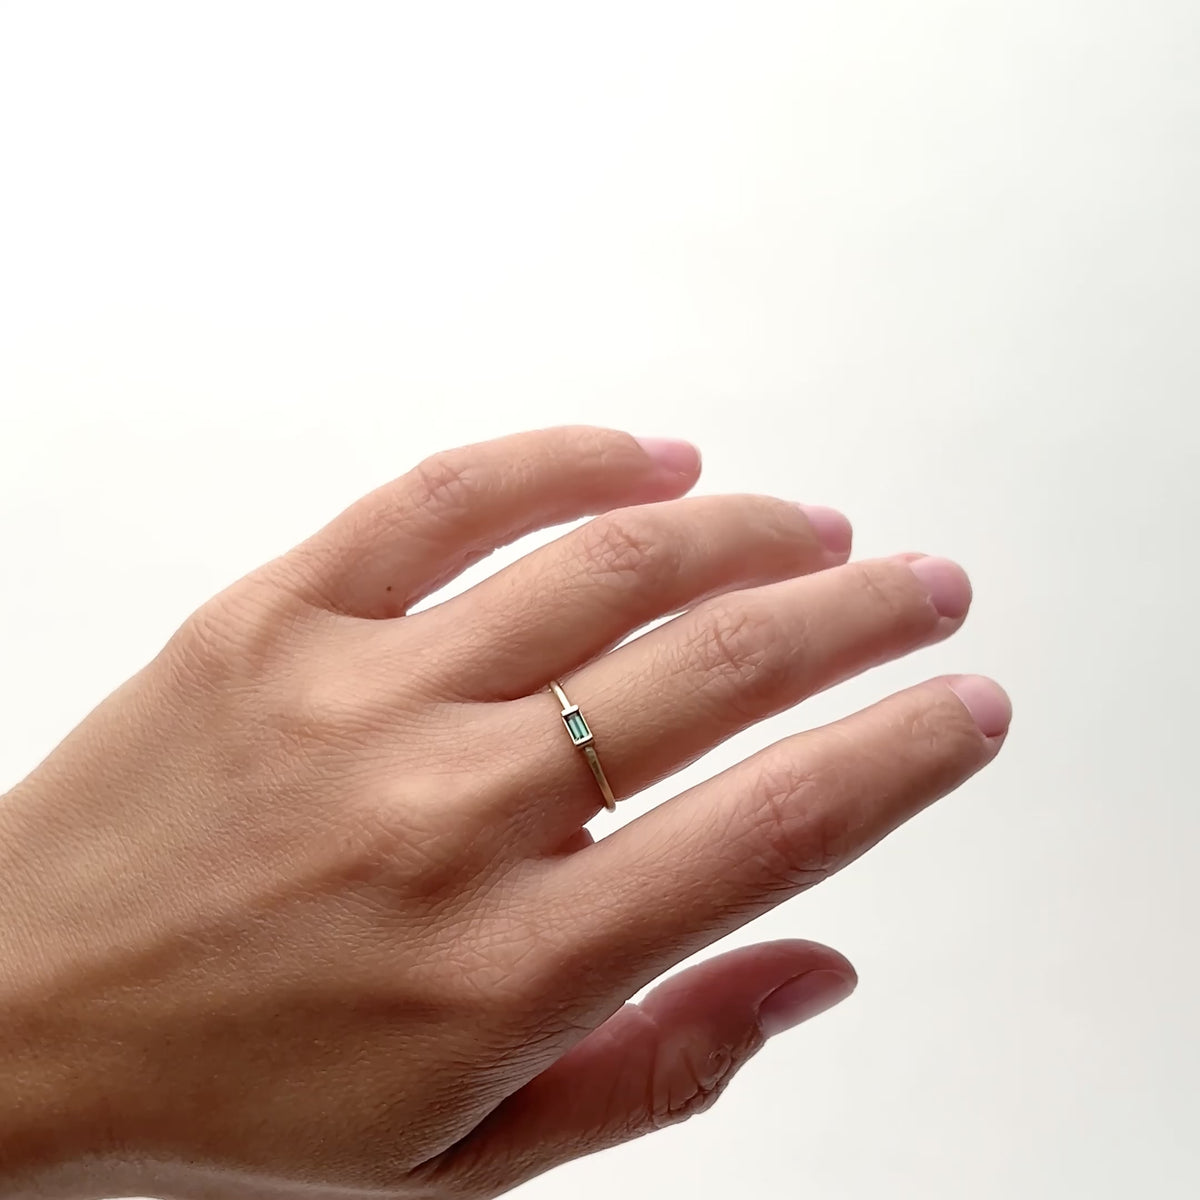 A model wears an ultra thin 14k yellow gold rounded band with a Tourmaline baguette set into the center. Designed and handcrafted in Portland, Oregon.